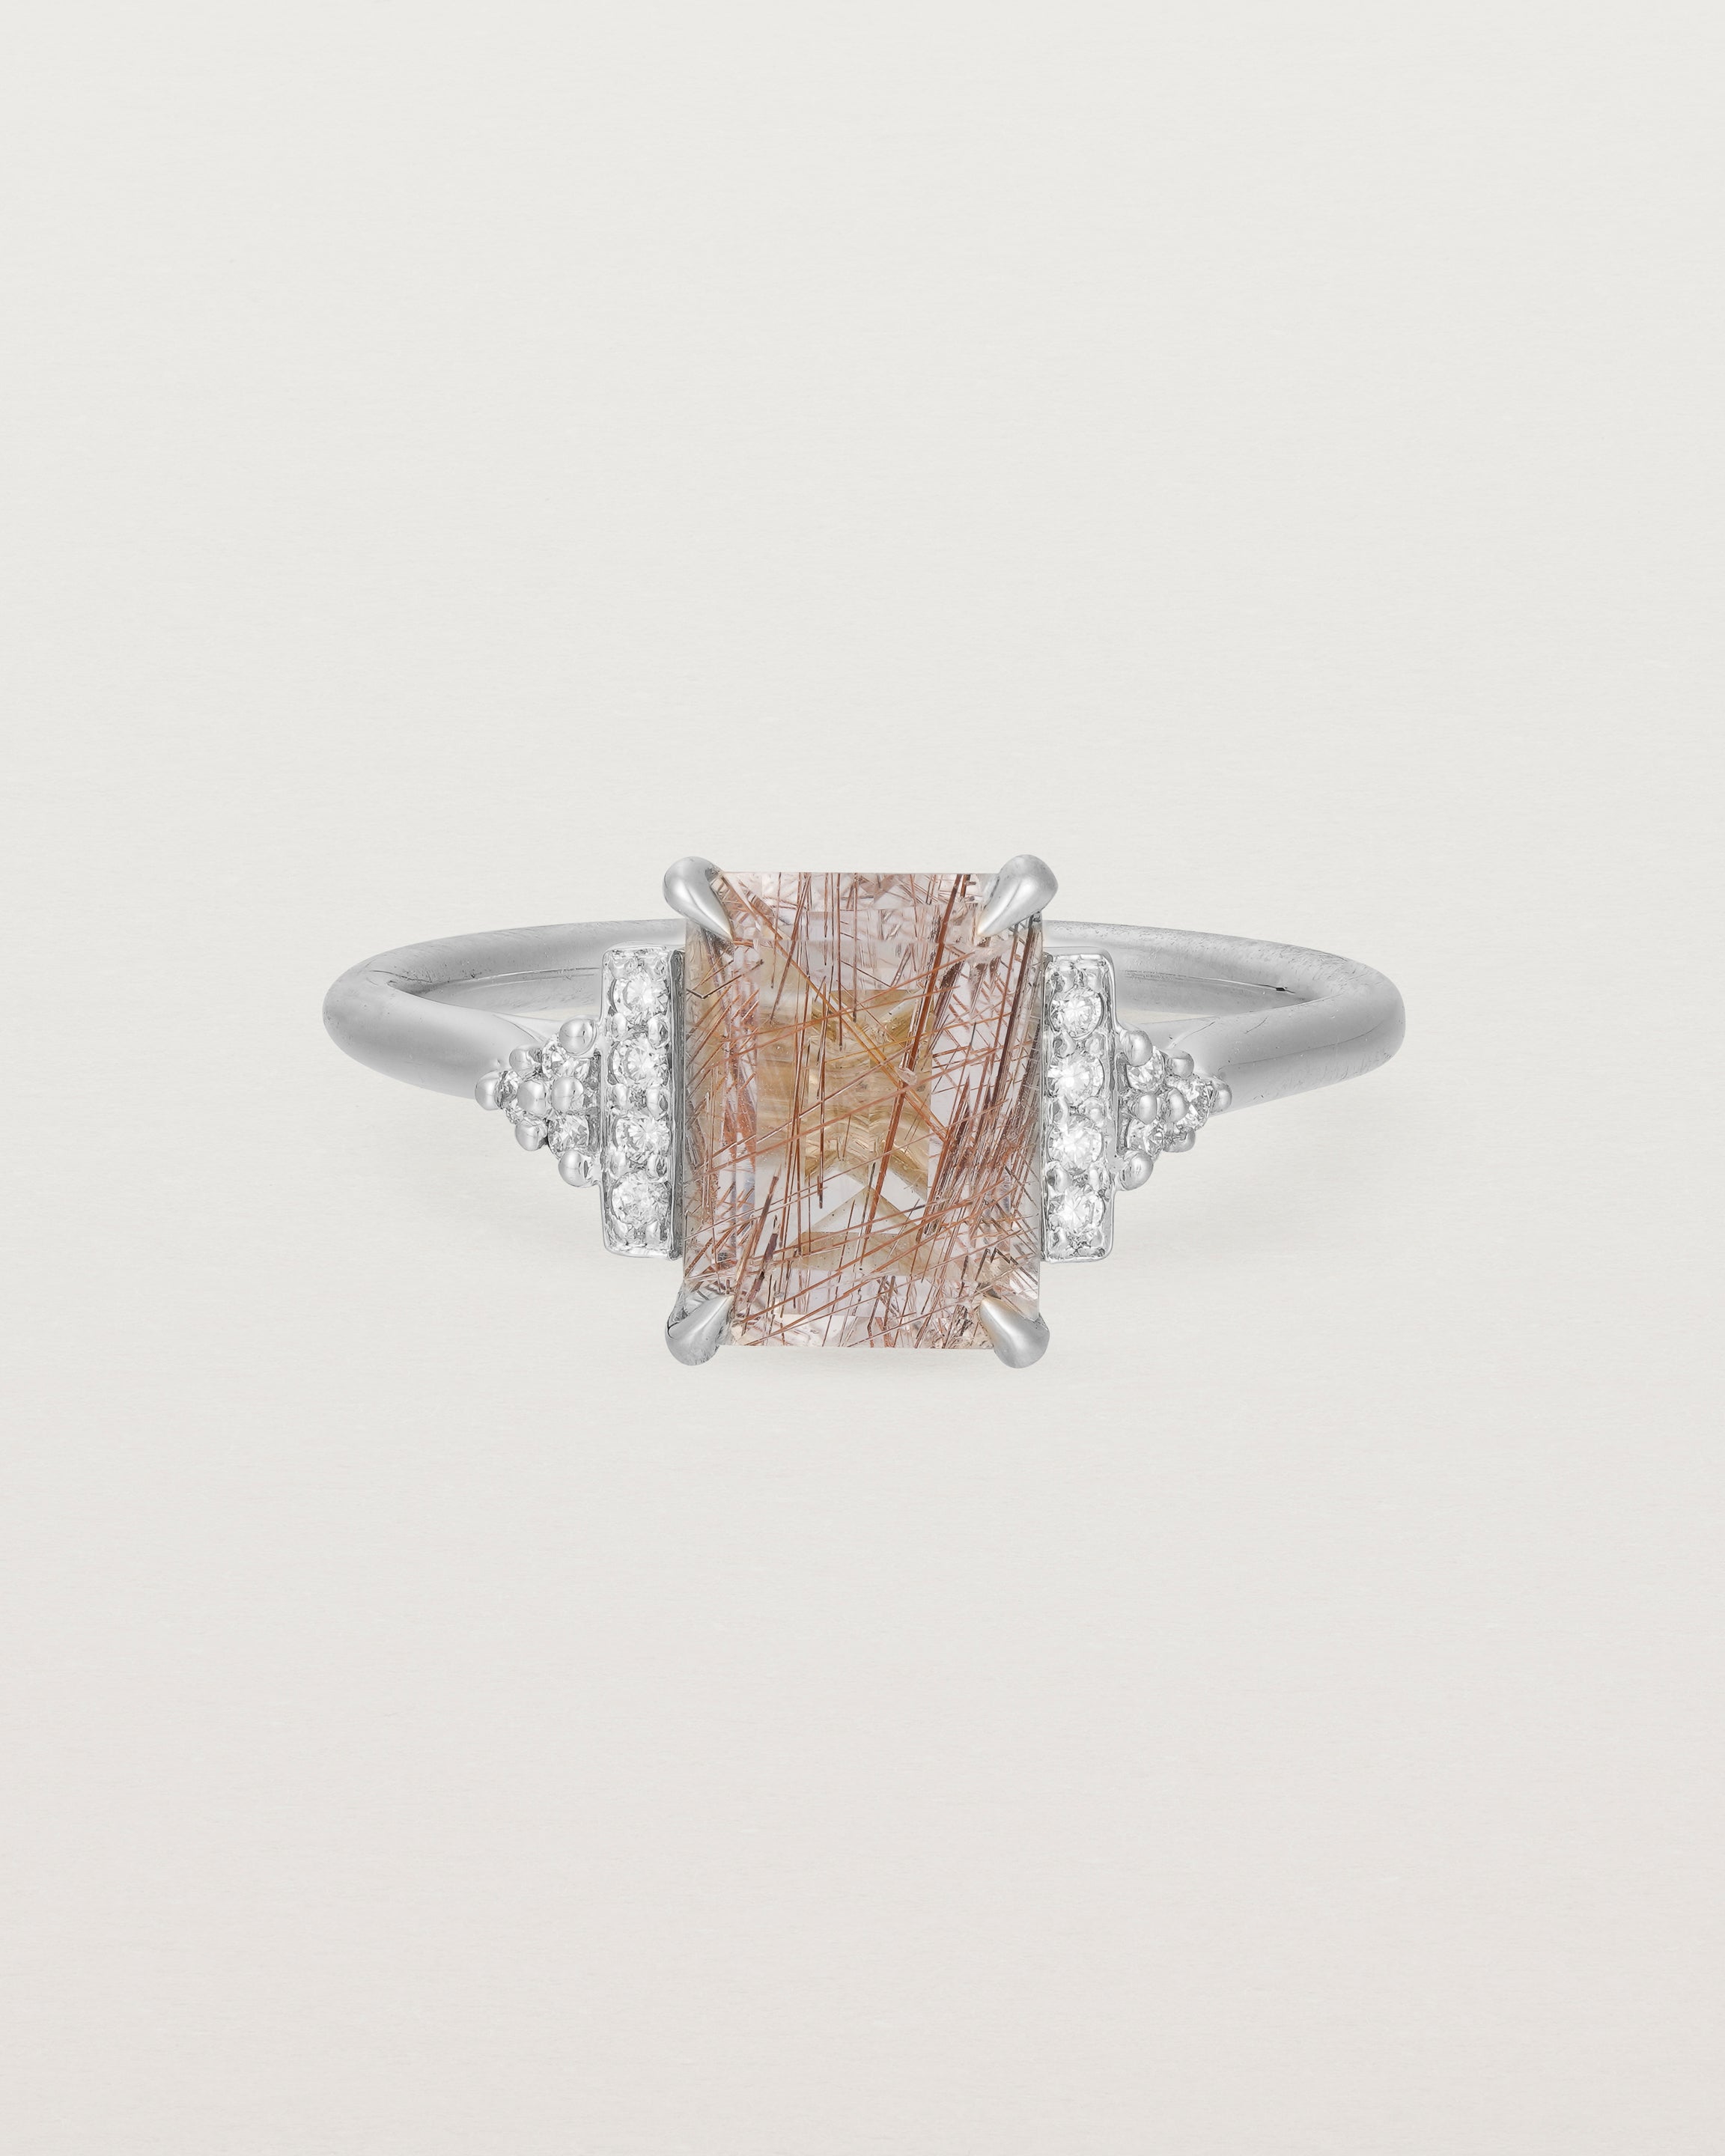 Front view of the Elodie Ring featuring a emerald cut rutilated quartz in white gold